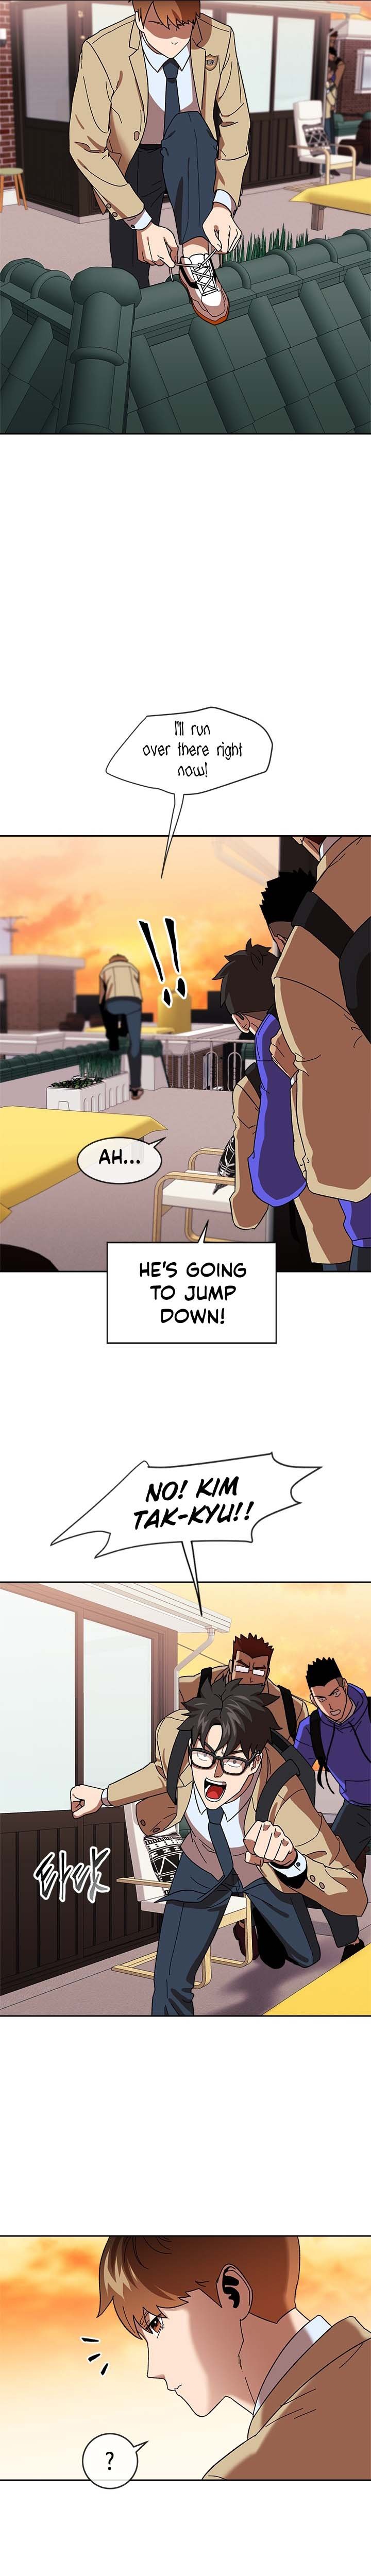 Conquer The Throne Highschool - Page 2